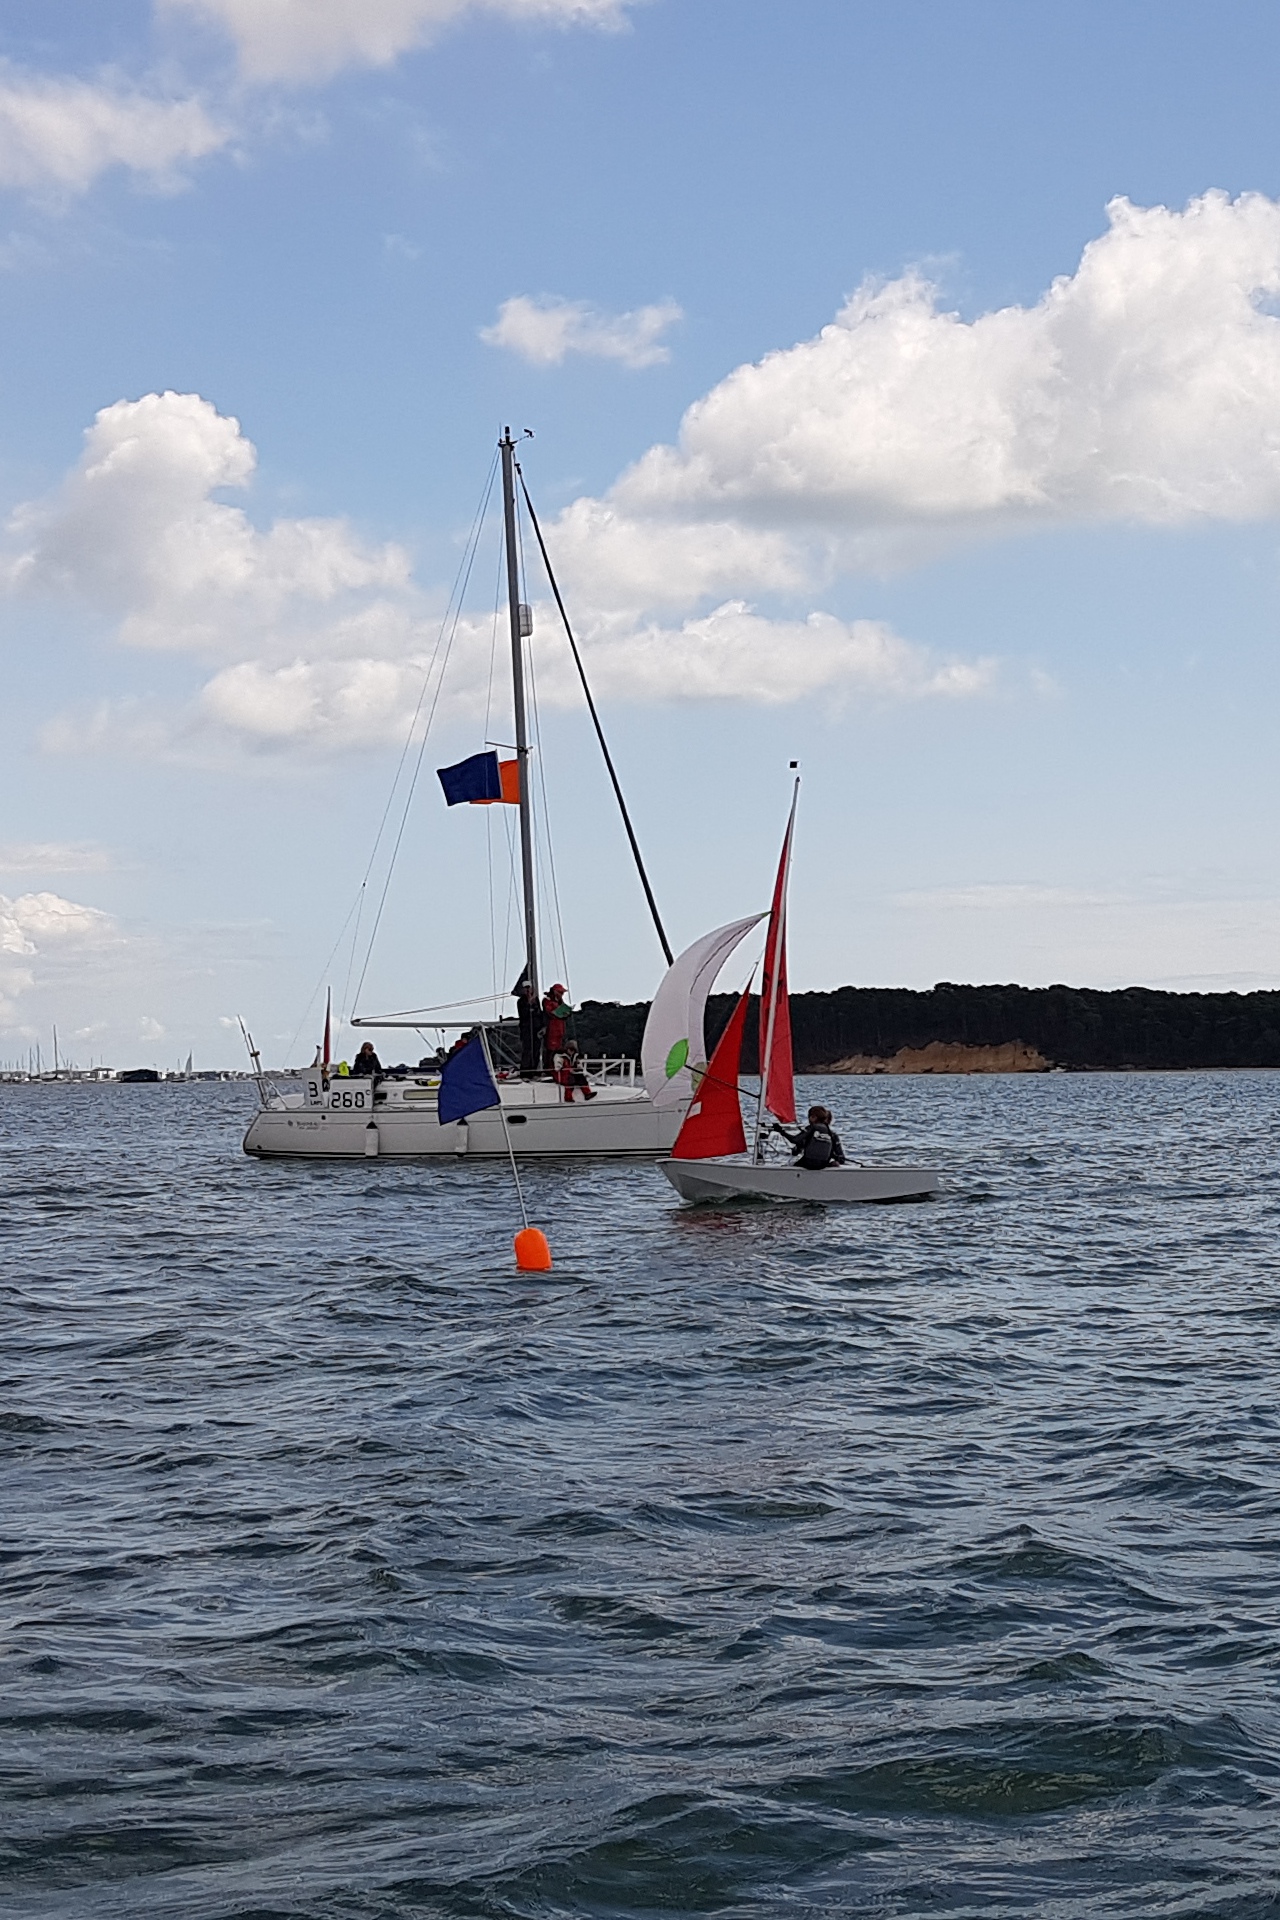 A grey GRP Mirror dinghy, with white decks crossing the finish line with spinnaker set in a light breeze